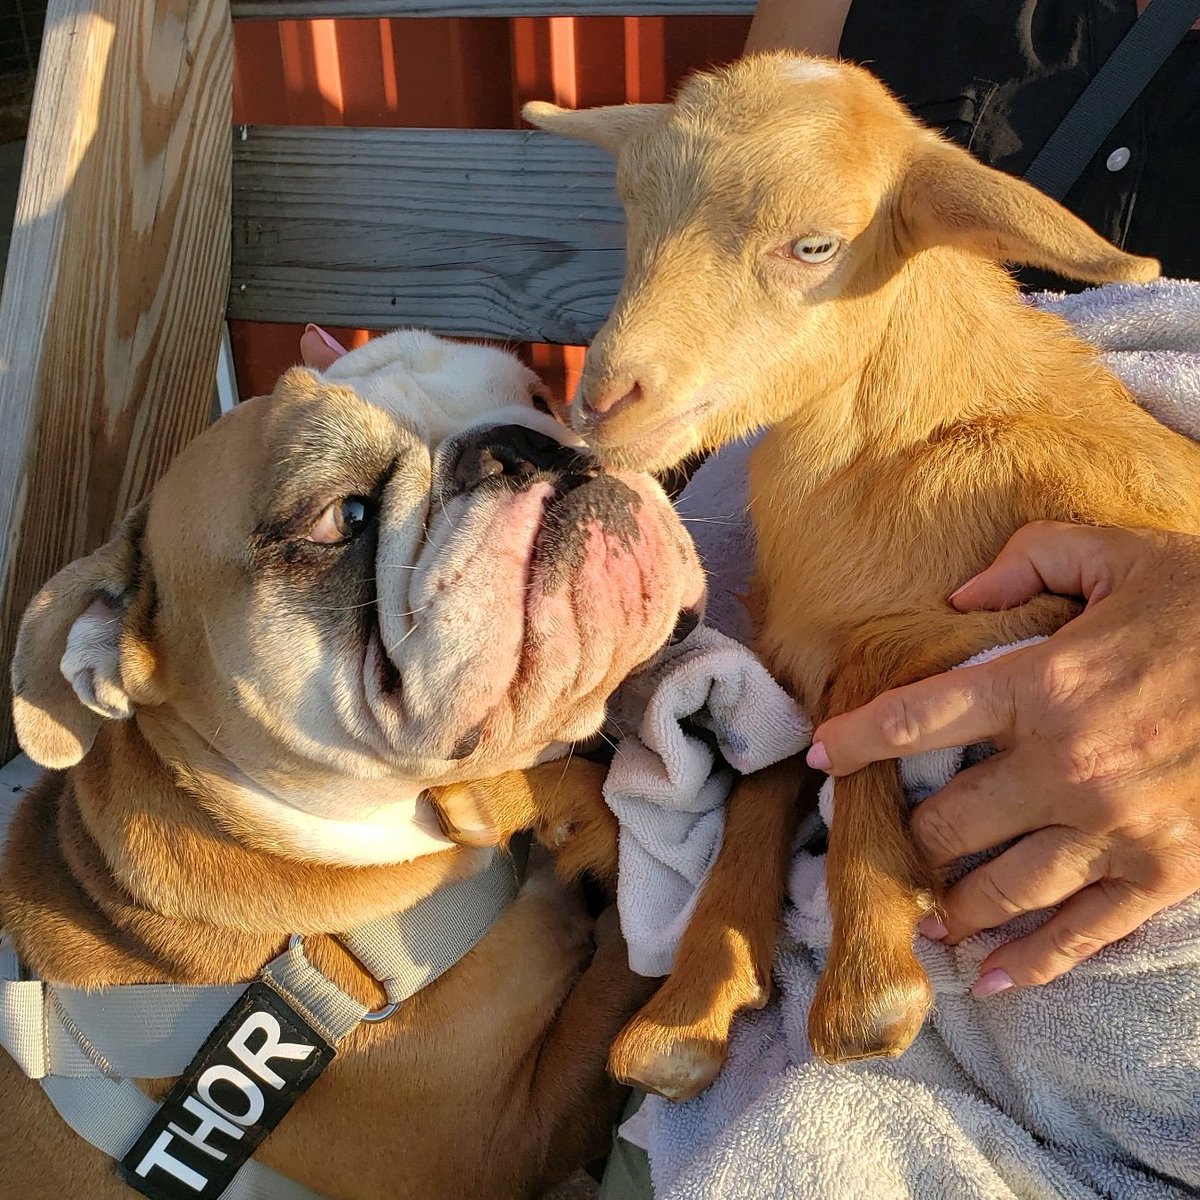 It's true....one of my BFF's is a goat....be jealous 💕💞😁😎 Dis is Ginny 💜 She is da sweetest goat and I love giving her smooches 💕🥰💞
.
.
#bffs #bff #bestfriendgoals #squadgoals #goats #goatsofinstagram #babygoats #toocuteforwords